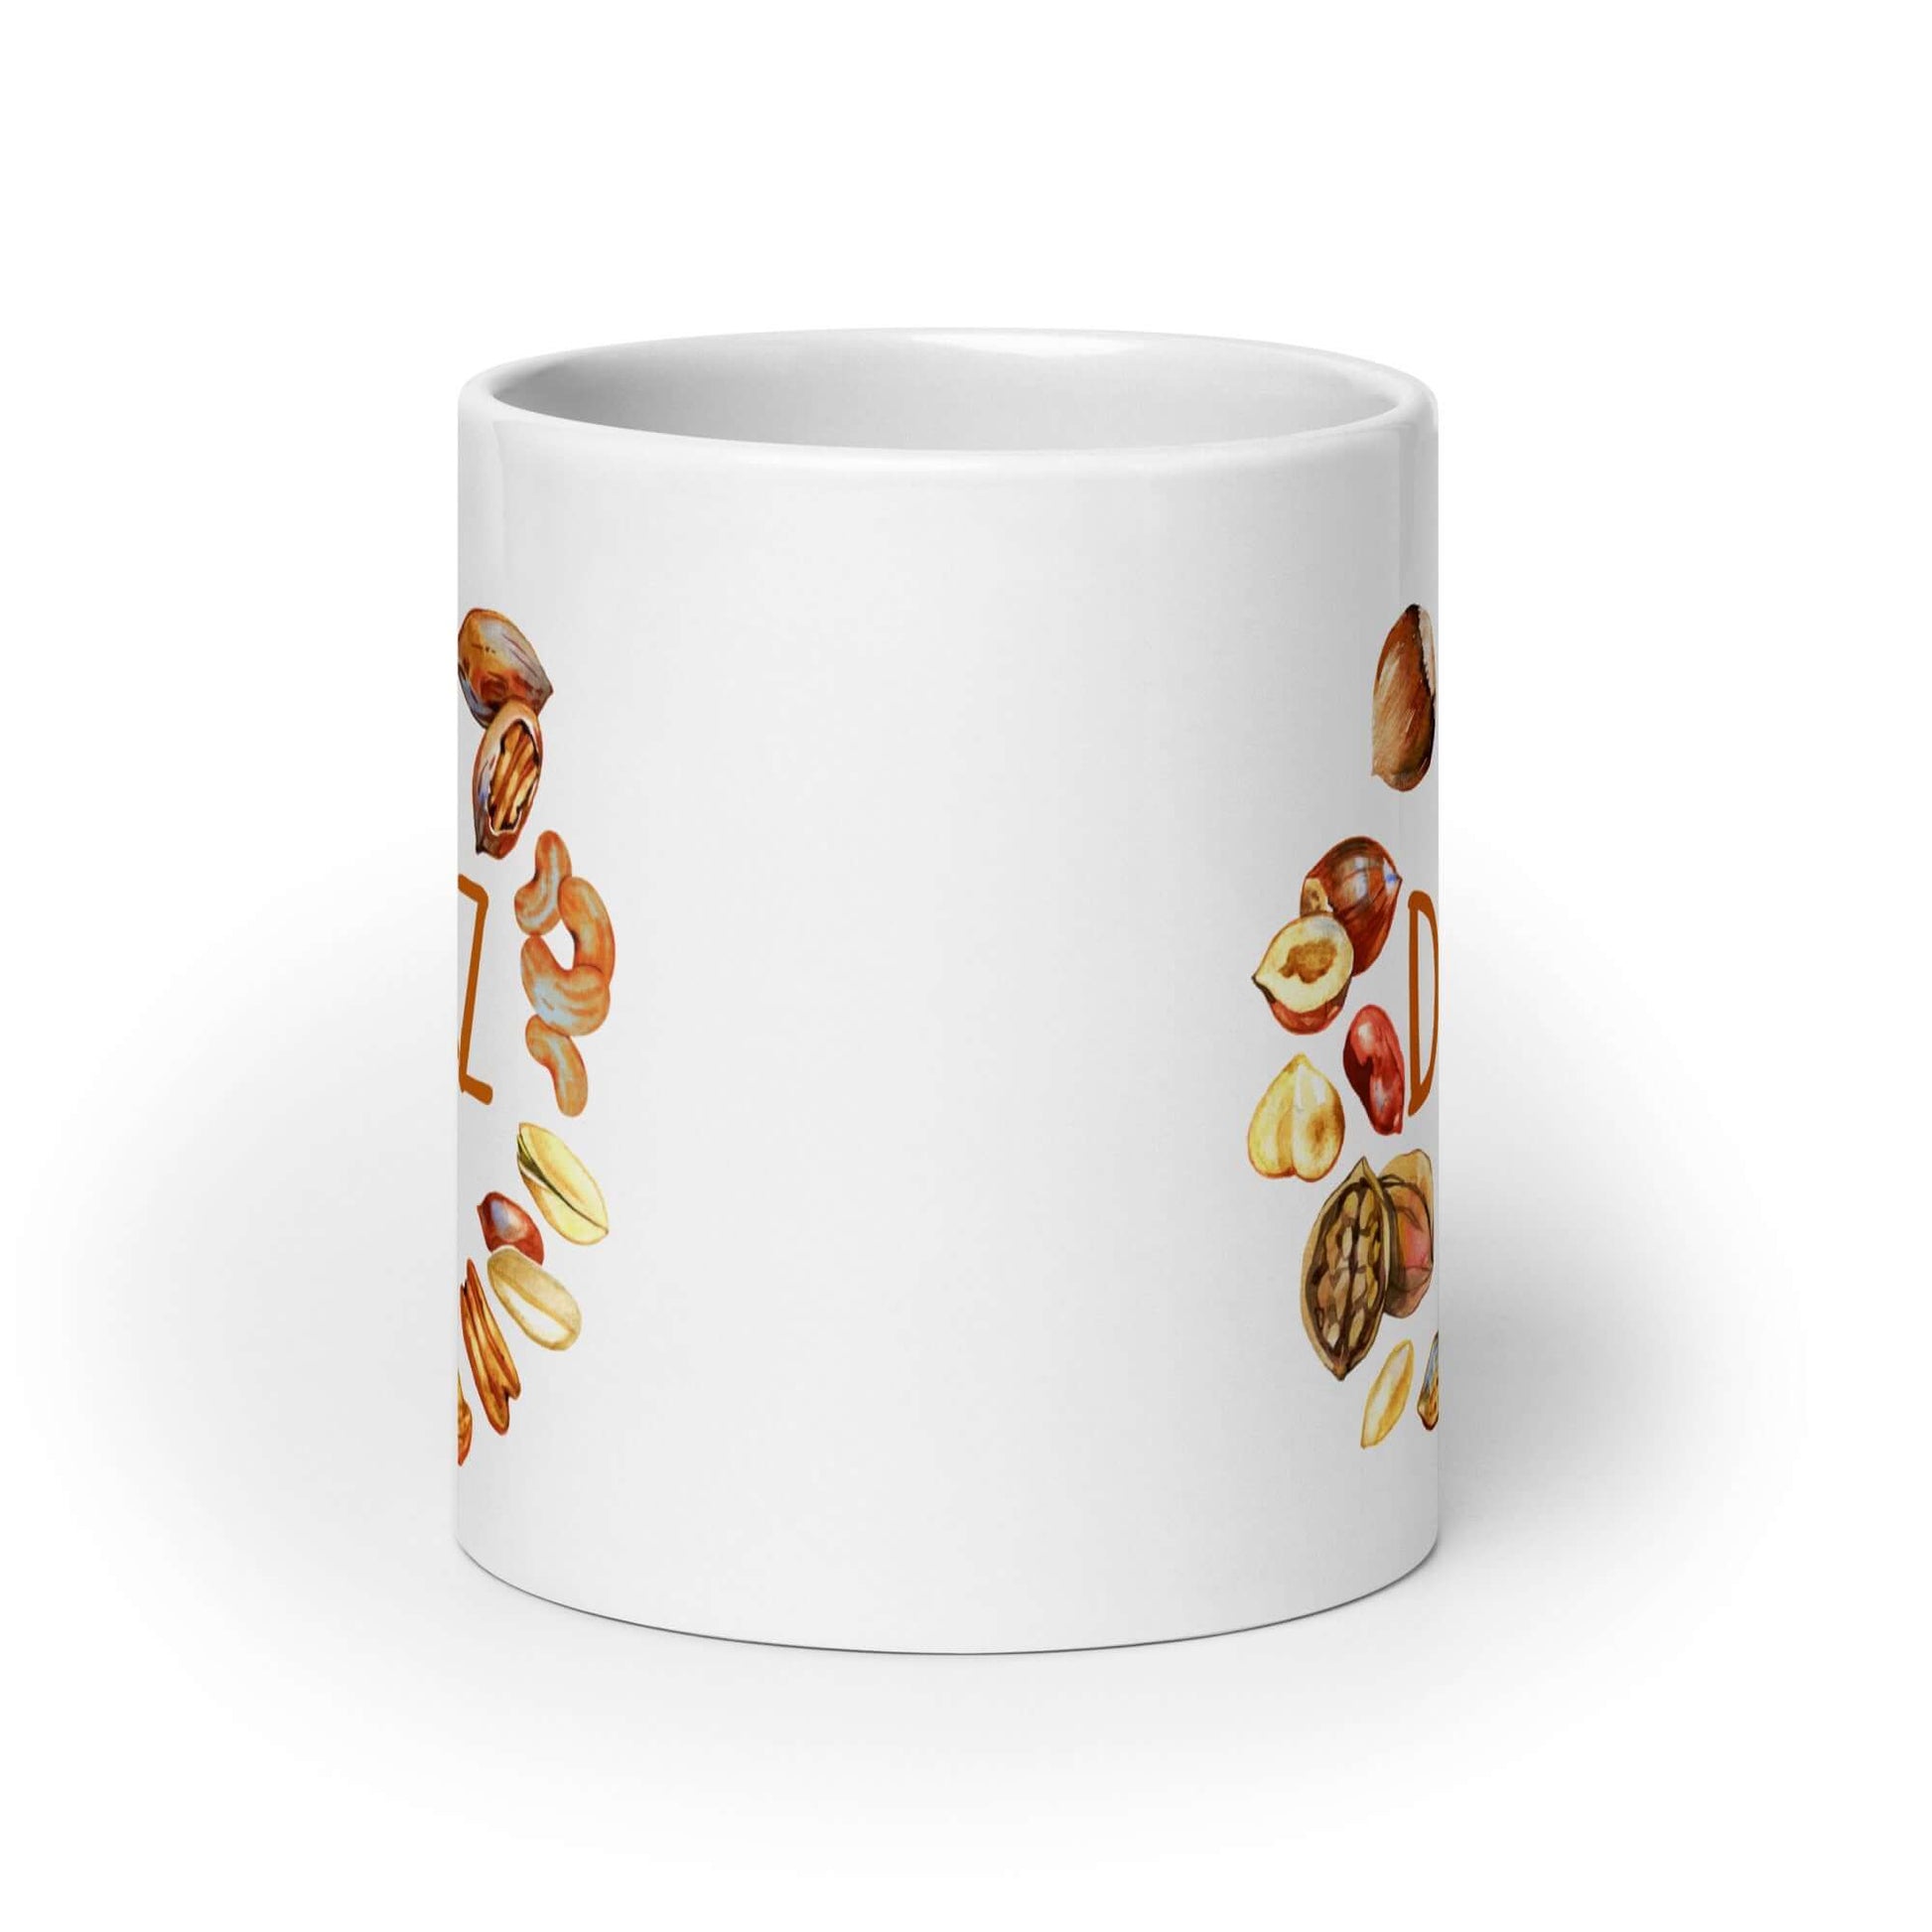 White ceramic mug with an image of various nuts and the word Deez. The graphic is printed on both sides of the mug.